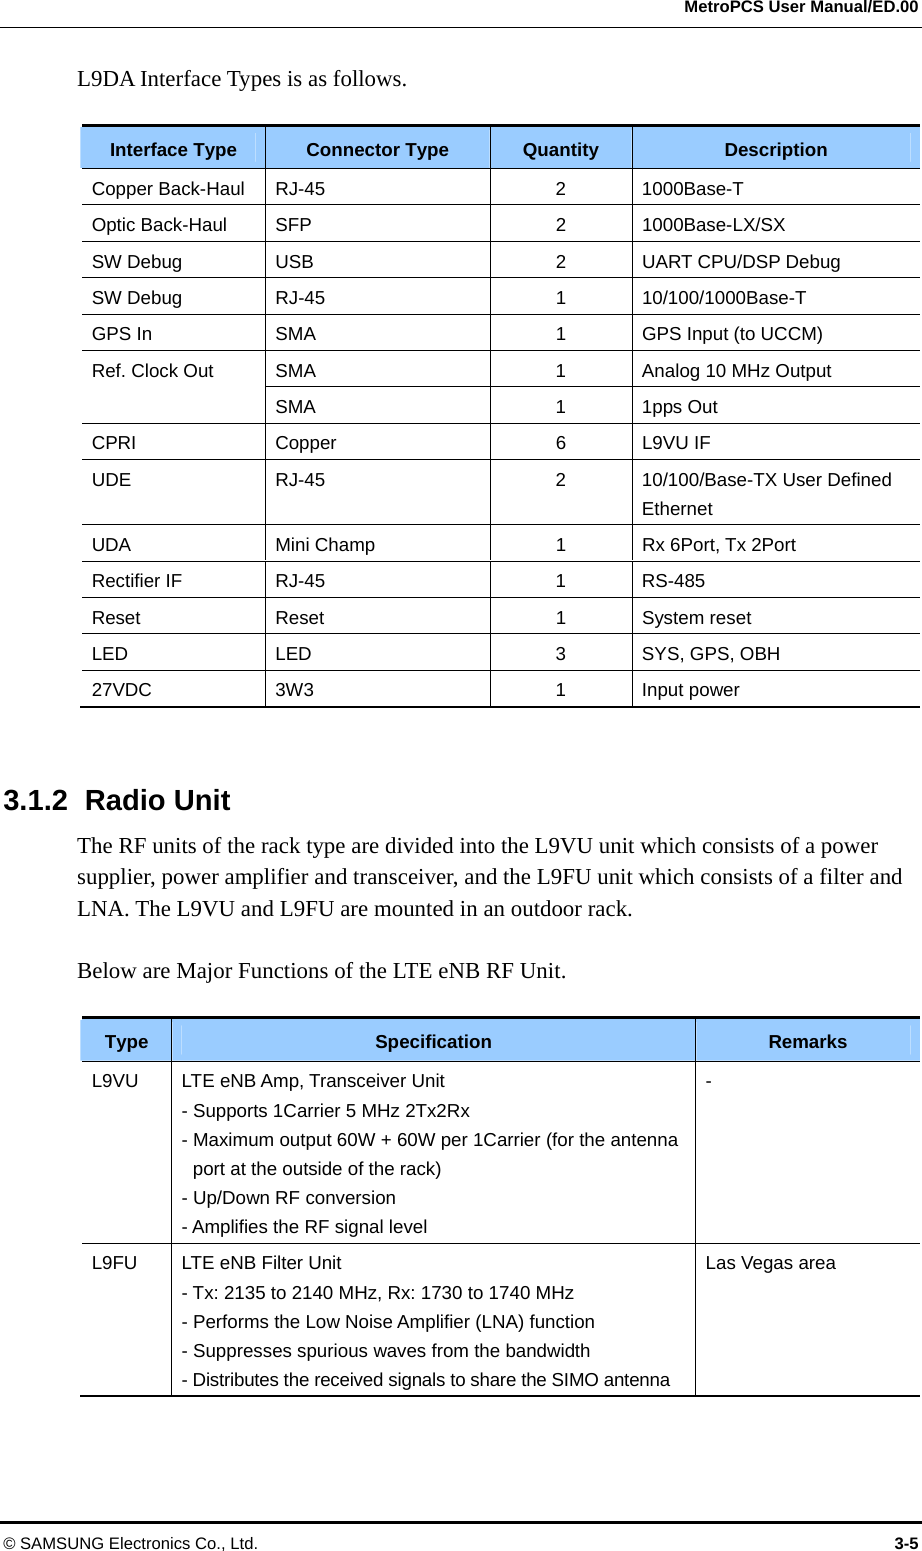  MetroPCS User Manual/ED.00 © SAMSUNG Electronics Co., Ltd.  3-5 L9DA Interface Types is as follows.  Interface Type  Connector Type  Quantity  Description Copper Back-Haul RJ-45 2 1000Base-T Optic Back-Haul SFP 2 1000Base-LX/SX SW Debug USB 2 UART CPU/DSP Debug SW Debug RJ-45 1 10/100/1000Base-T GPS In SMA 1 GPS Input (to UCCM) SMA 1 Analog 10 MHz Output Ref. Clock Out SMA 1 1pps Out CPRI Copper 6 L9VU IF UDE  RJ-45  2  10/100/Base-TX User Defined Ethernet UDA Mini Champ 1 Rx 6Port, Tx 2Port Rectifier IF   RJ-45 1 RS-485 Reset Reset 1 System reset LED LED 3 SYS, GPS, OBH 27VDC 3W3 1 Input power   3.1.2 Radio Unit The RF units of the rack type are divided into the L9VU unit which consists of a power supplier, power amplifier and transceiver, and the L9FU unit which consists of a filter and LNA. The L9VU and L9FU are mounted in an outdoor rack.  Below are Major Functions of the LTE eNB RF Unit.  Type  Specification  Remarks L9VU  LTE eNB Amp, Transceiver Unit   - Supports 1Carrier 5 MHz 2Tx2Rx - Maximum output 60W + 60W per 1Carrier (for the antenna port at the outside of the rack) - Up/Down RF conversion - Amplifies the RF signal level - L9FU  LTE eNB Filter Unit   - Tx: 2135 to 2140 MHz, Rx: 1730 to 1740 MHz - Performs the Low Noise Amplifier (LNA) function - Suppresses spurious waves from the bandwidth - Distributes the received signals to share the SIMO antenna Las Vegas area 